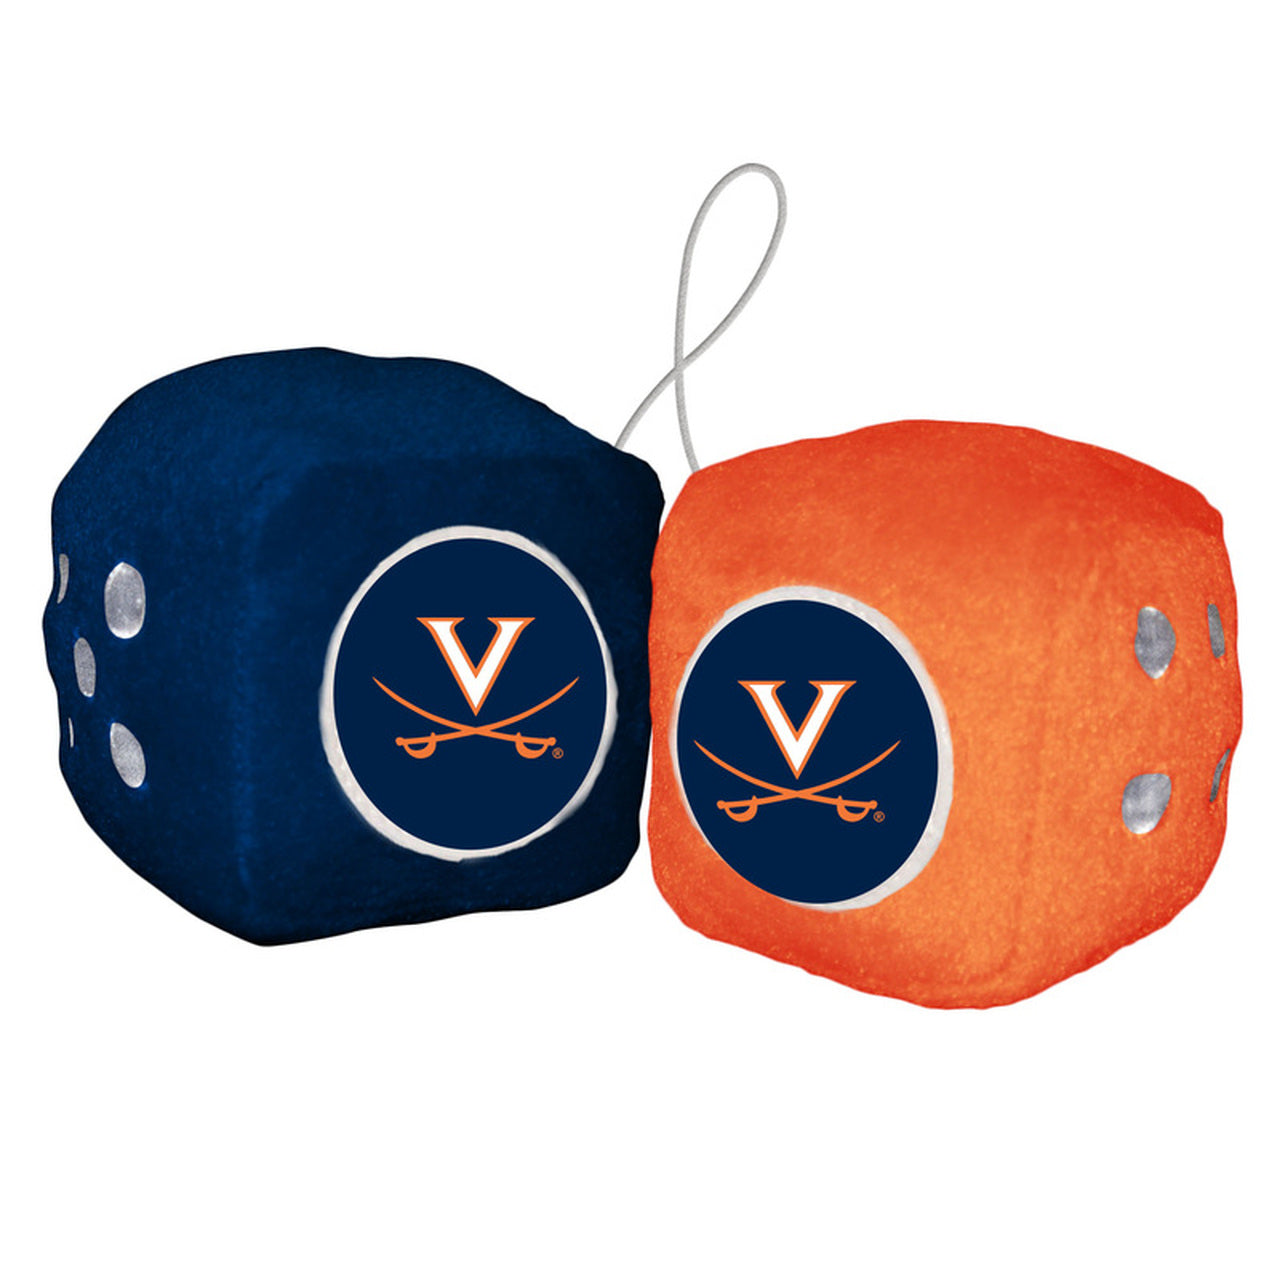 Virginia Cavaliers Fuzzy Dice - 3" cubes, team colors. NCAA licensed by Fremont Die. Perfect for car, man cave, or office display!